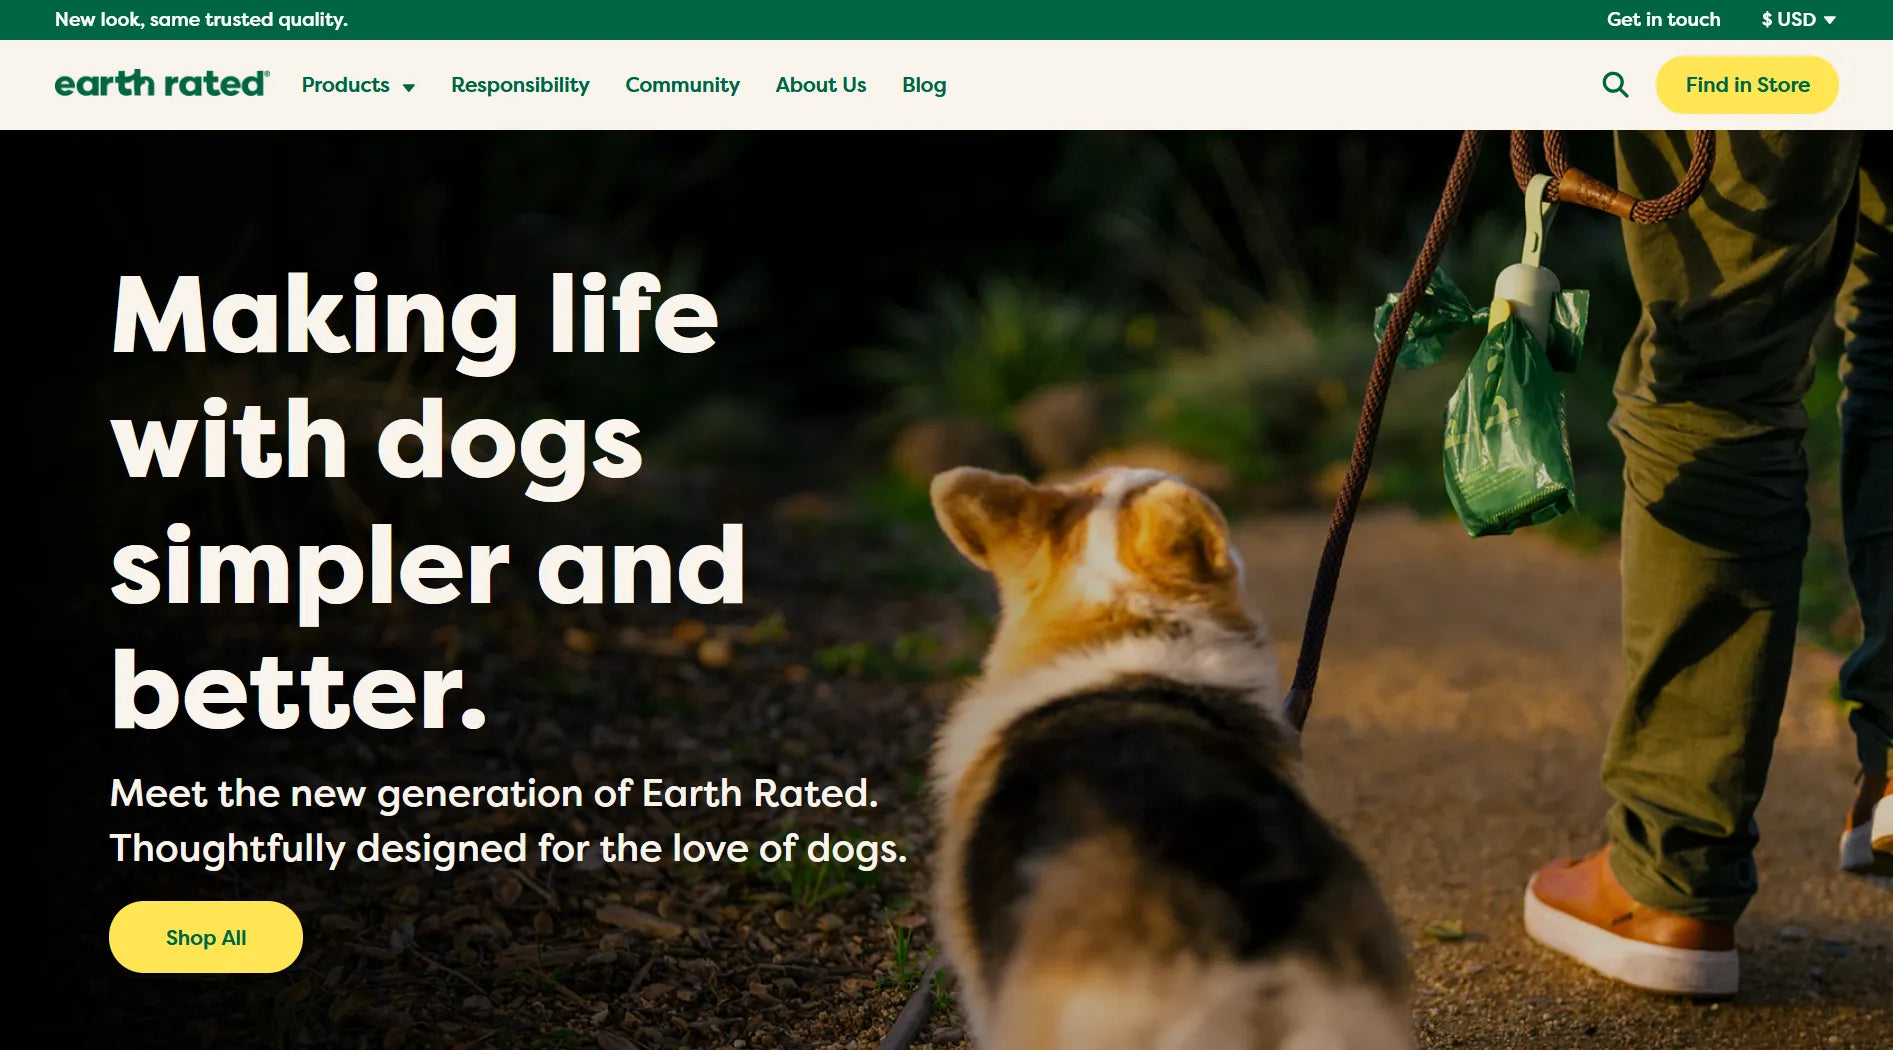 Screenshot of Earth Rated’s website.